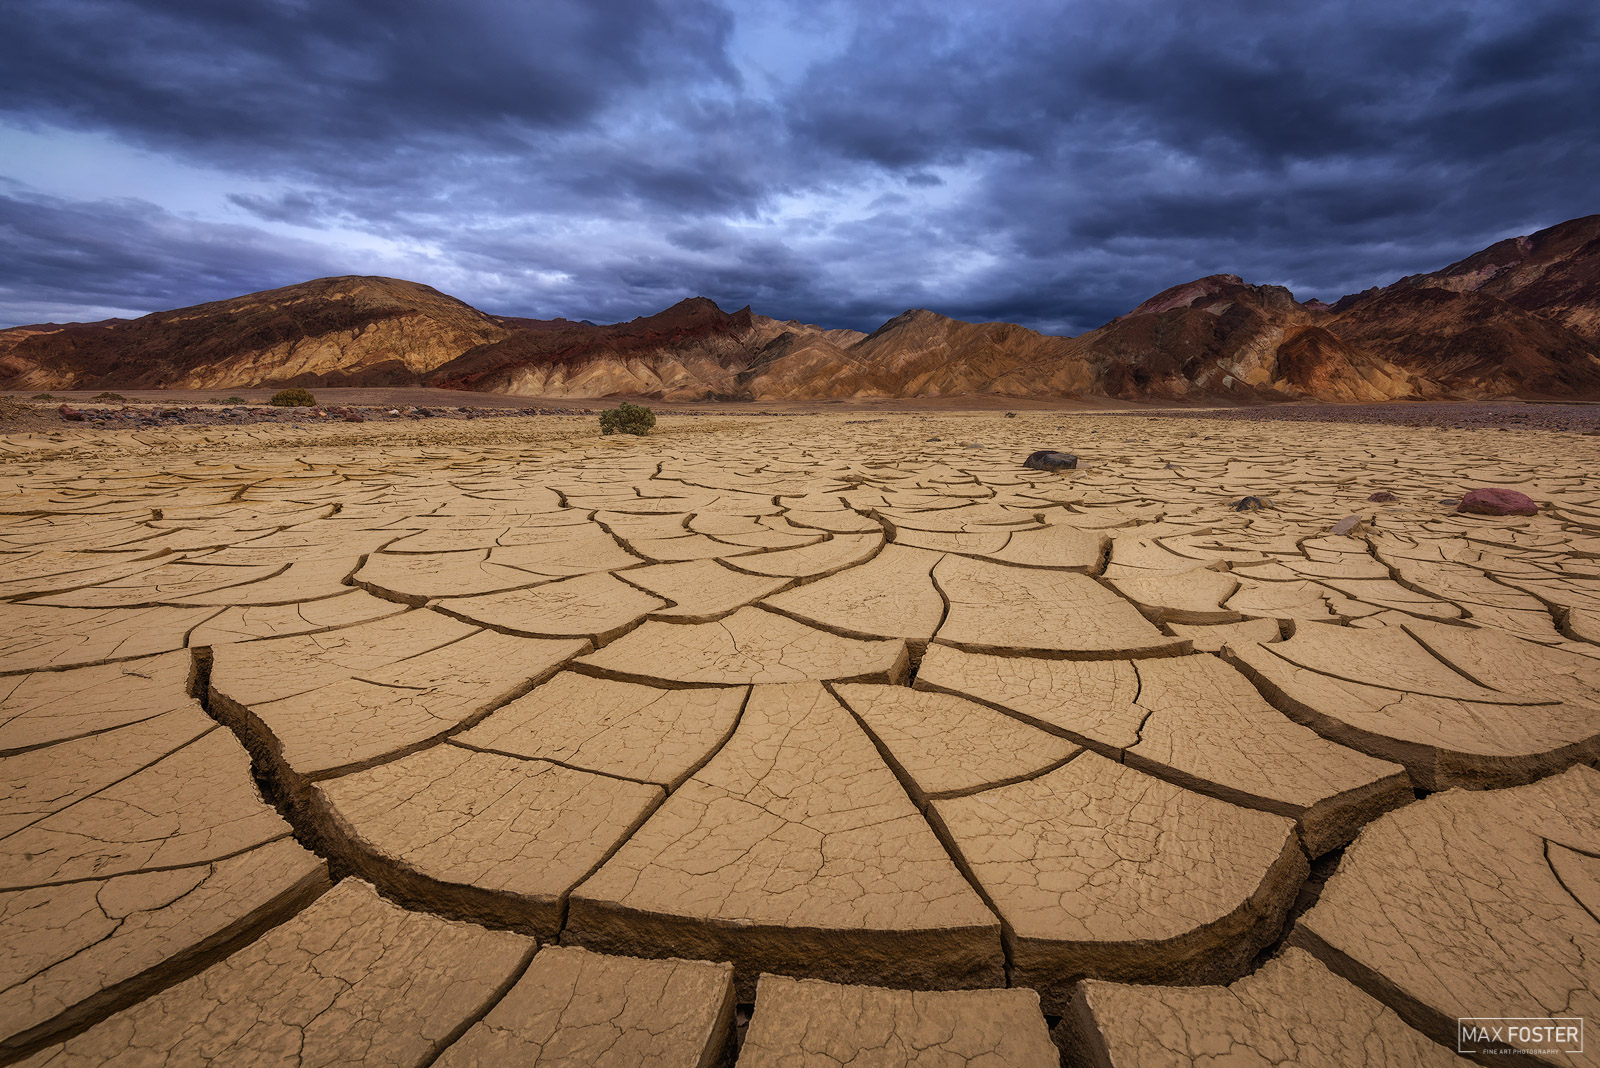 Bring nature into your home with Crack Addict, Max Foster's limited edition photography print of mud cracks in Death Valley National...